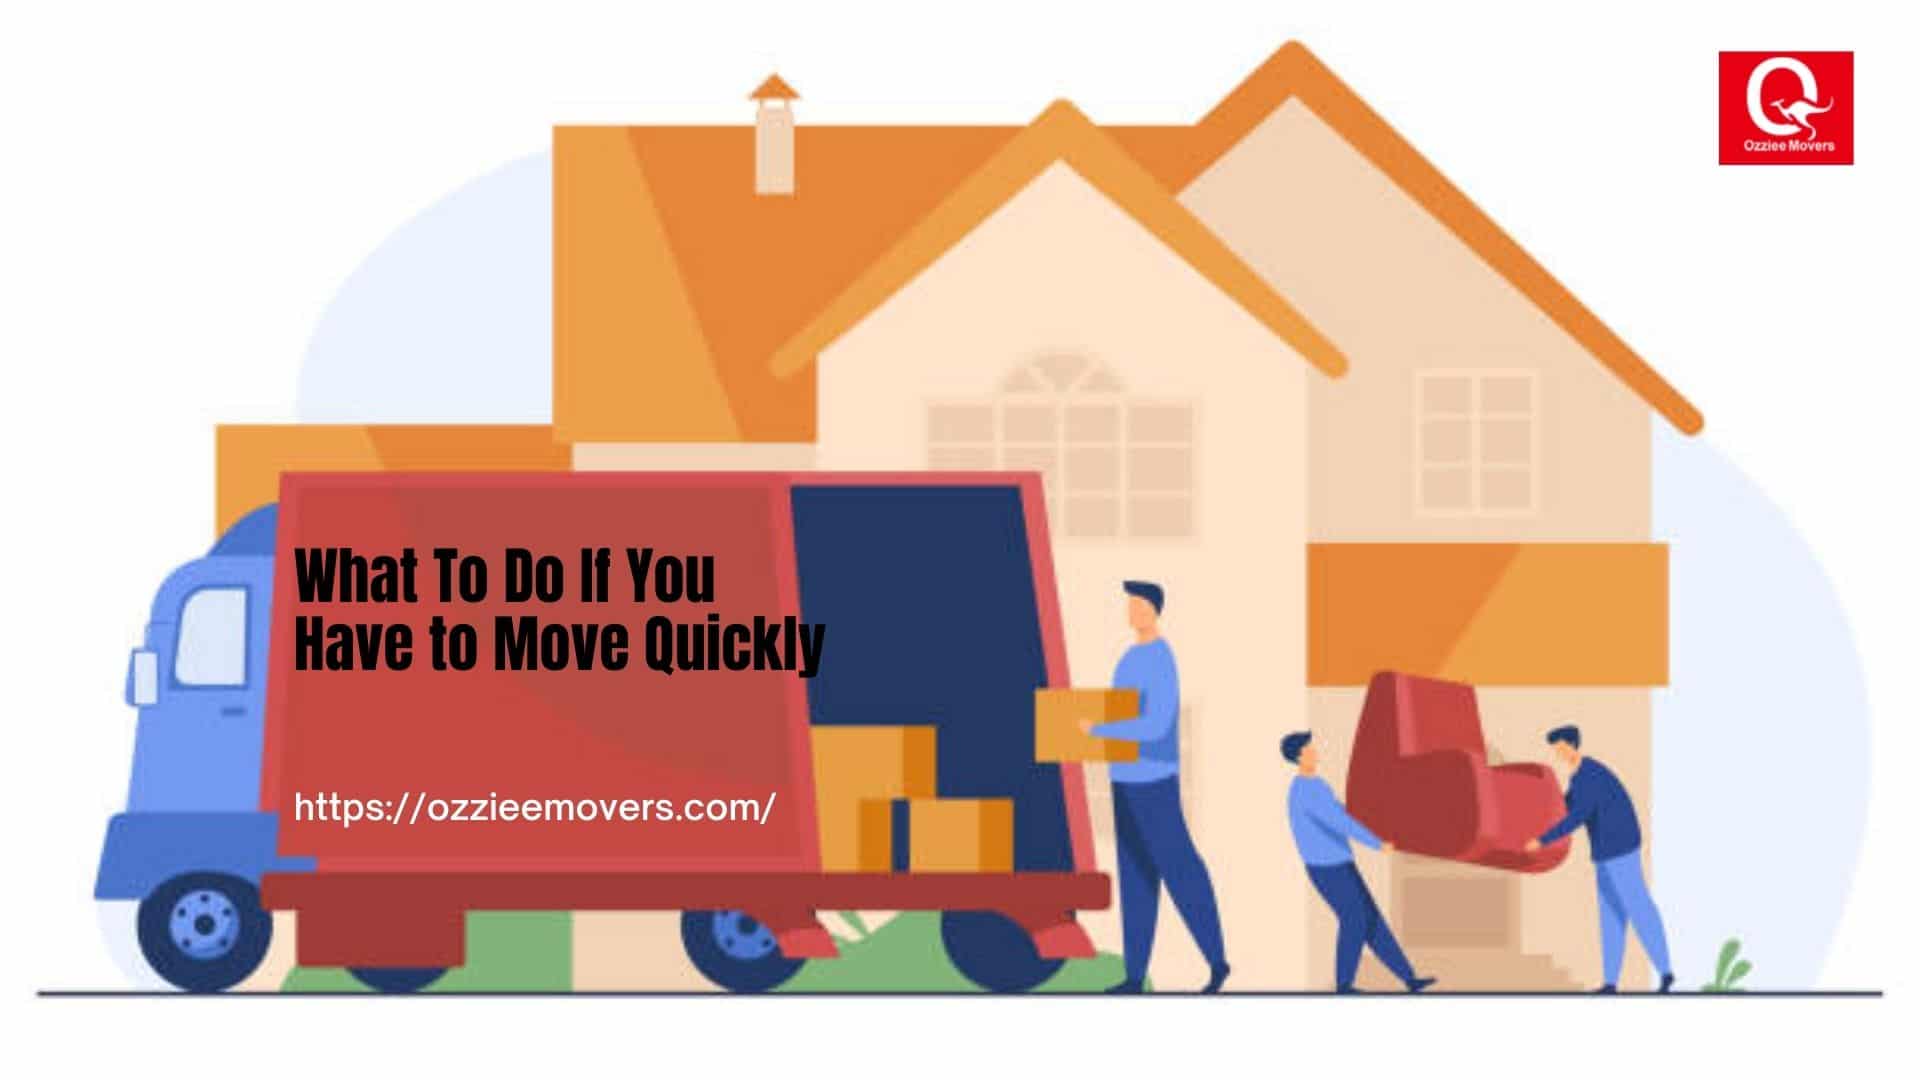 What To Do If You Have to Move-20f1dd0c